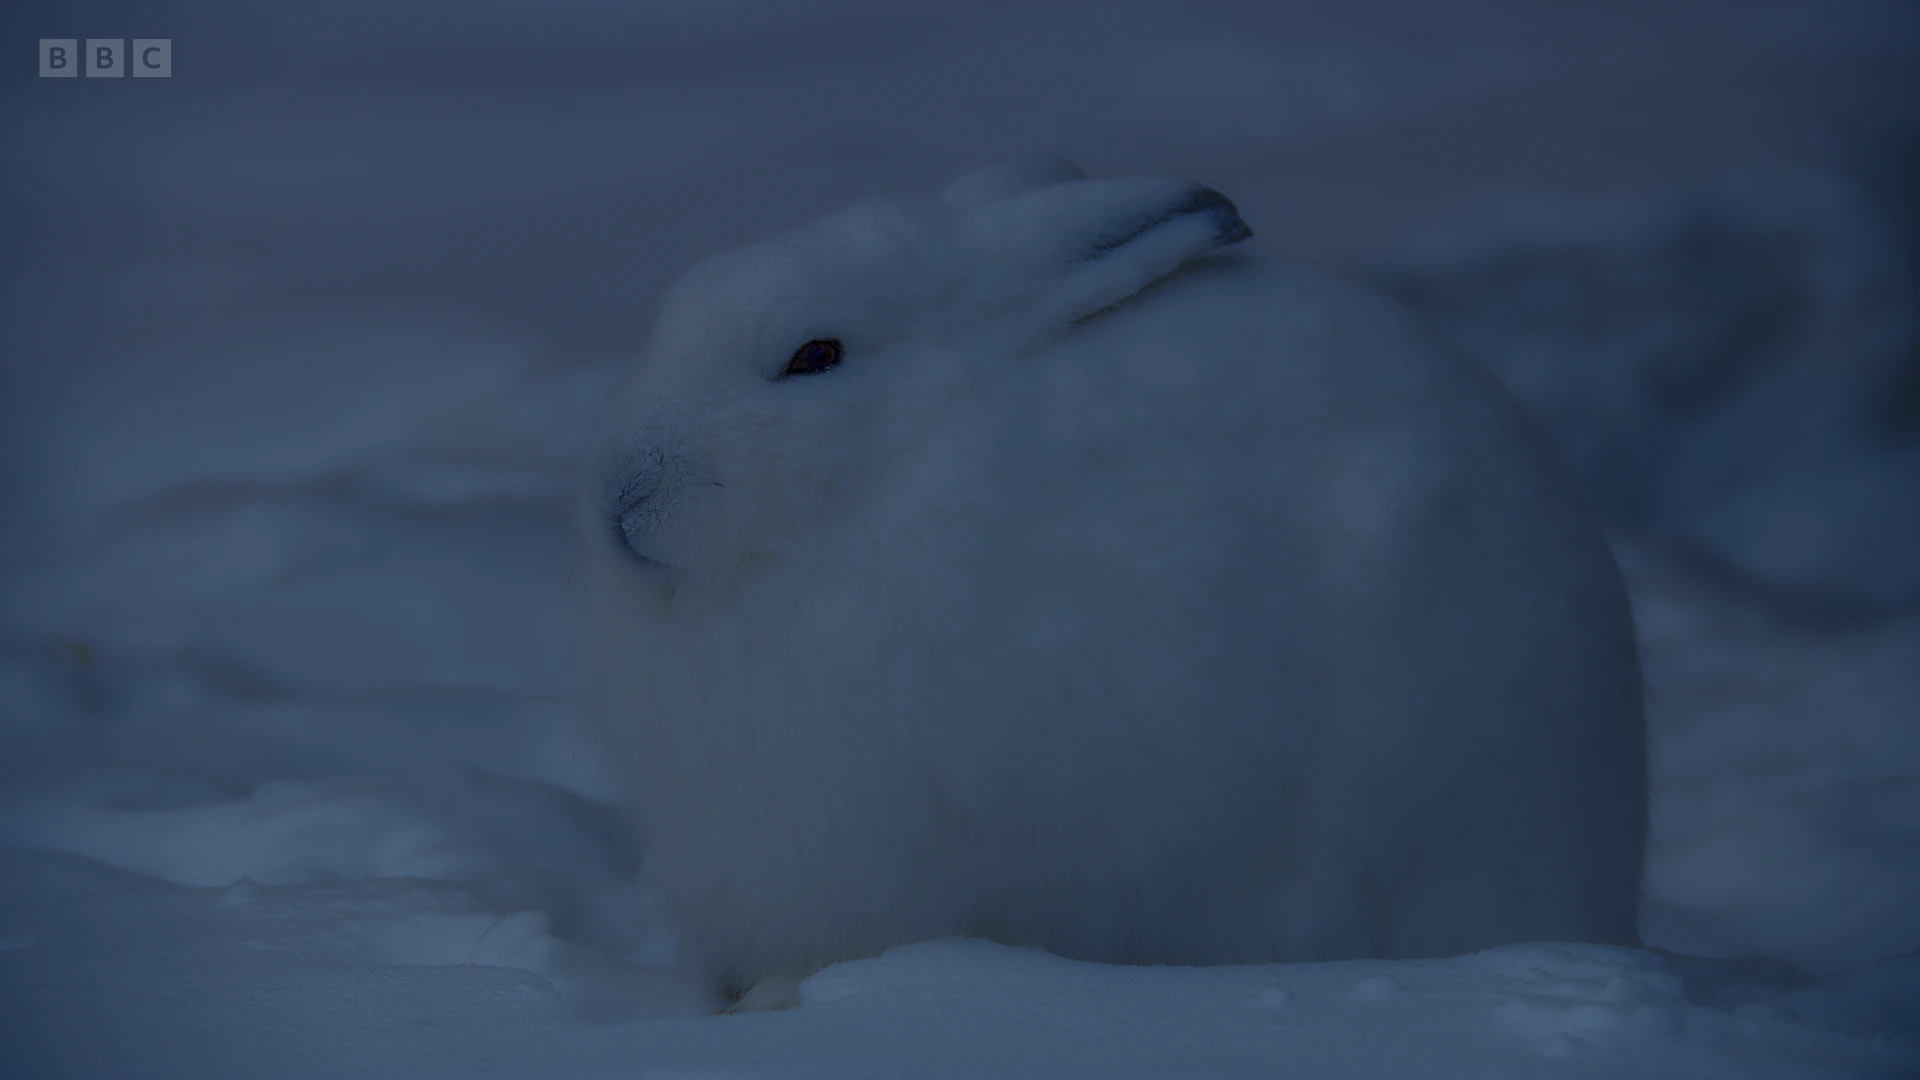 Arctic hare (Lepus arcticus monstrabilis) as shown in A Perfect Planet - The Sun